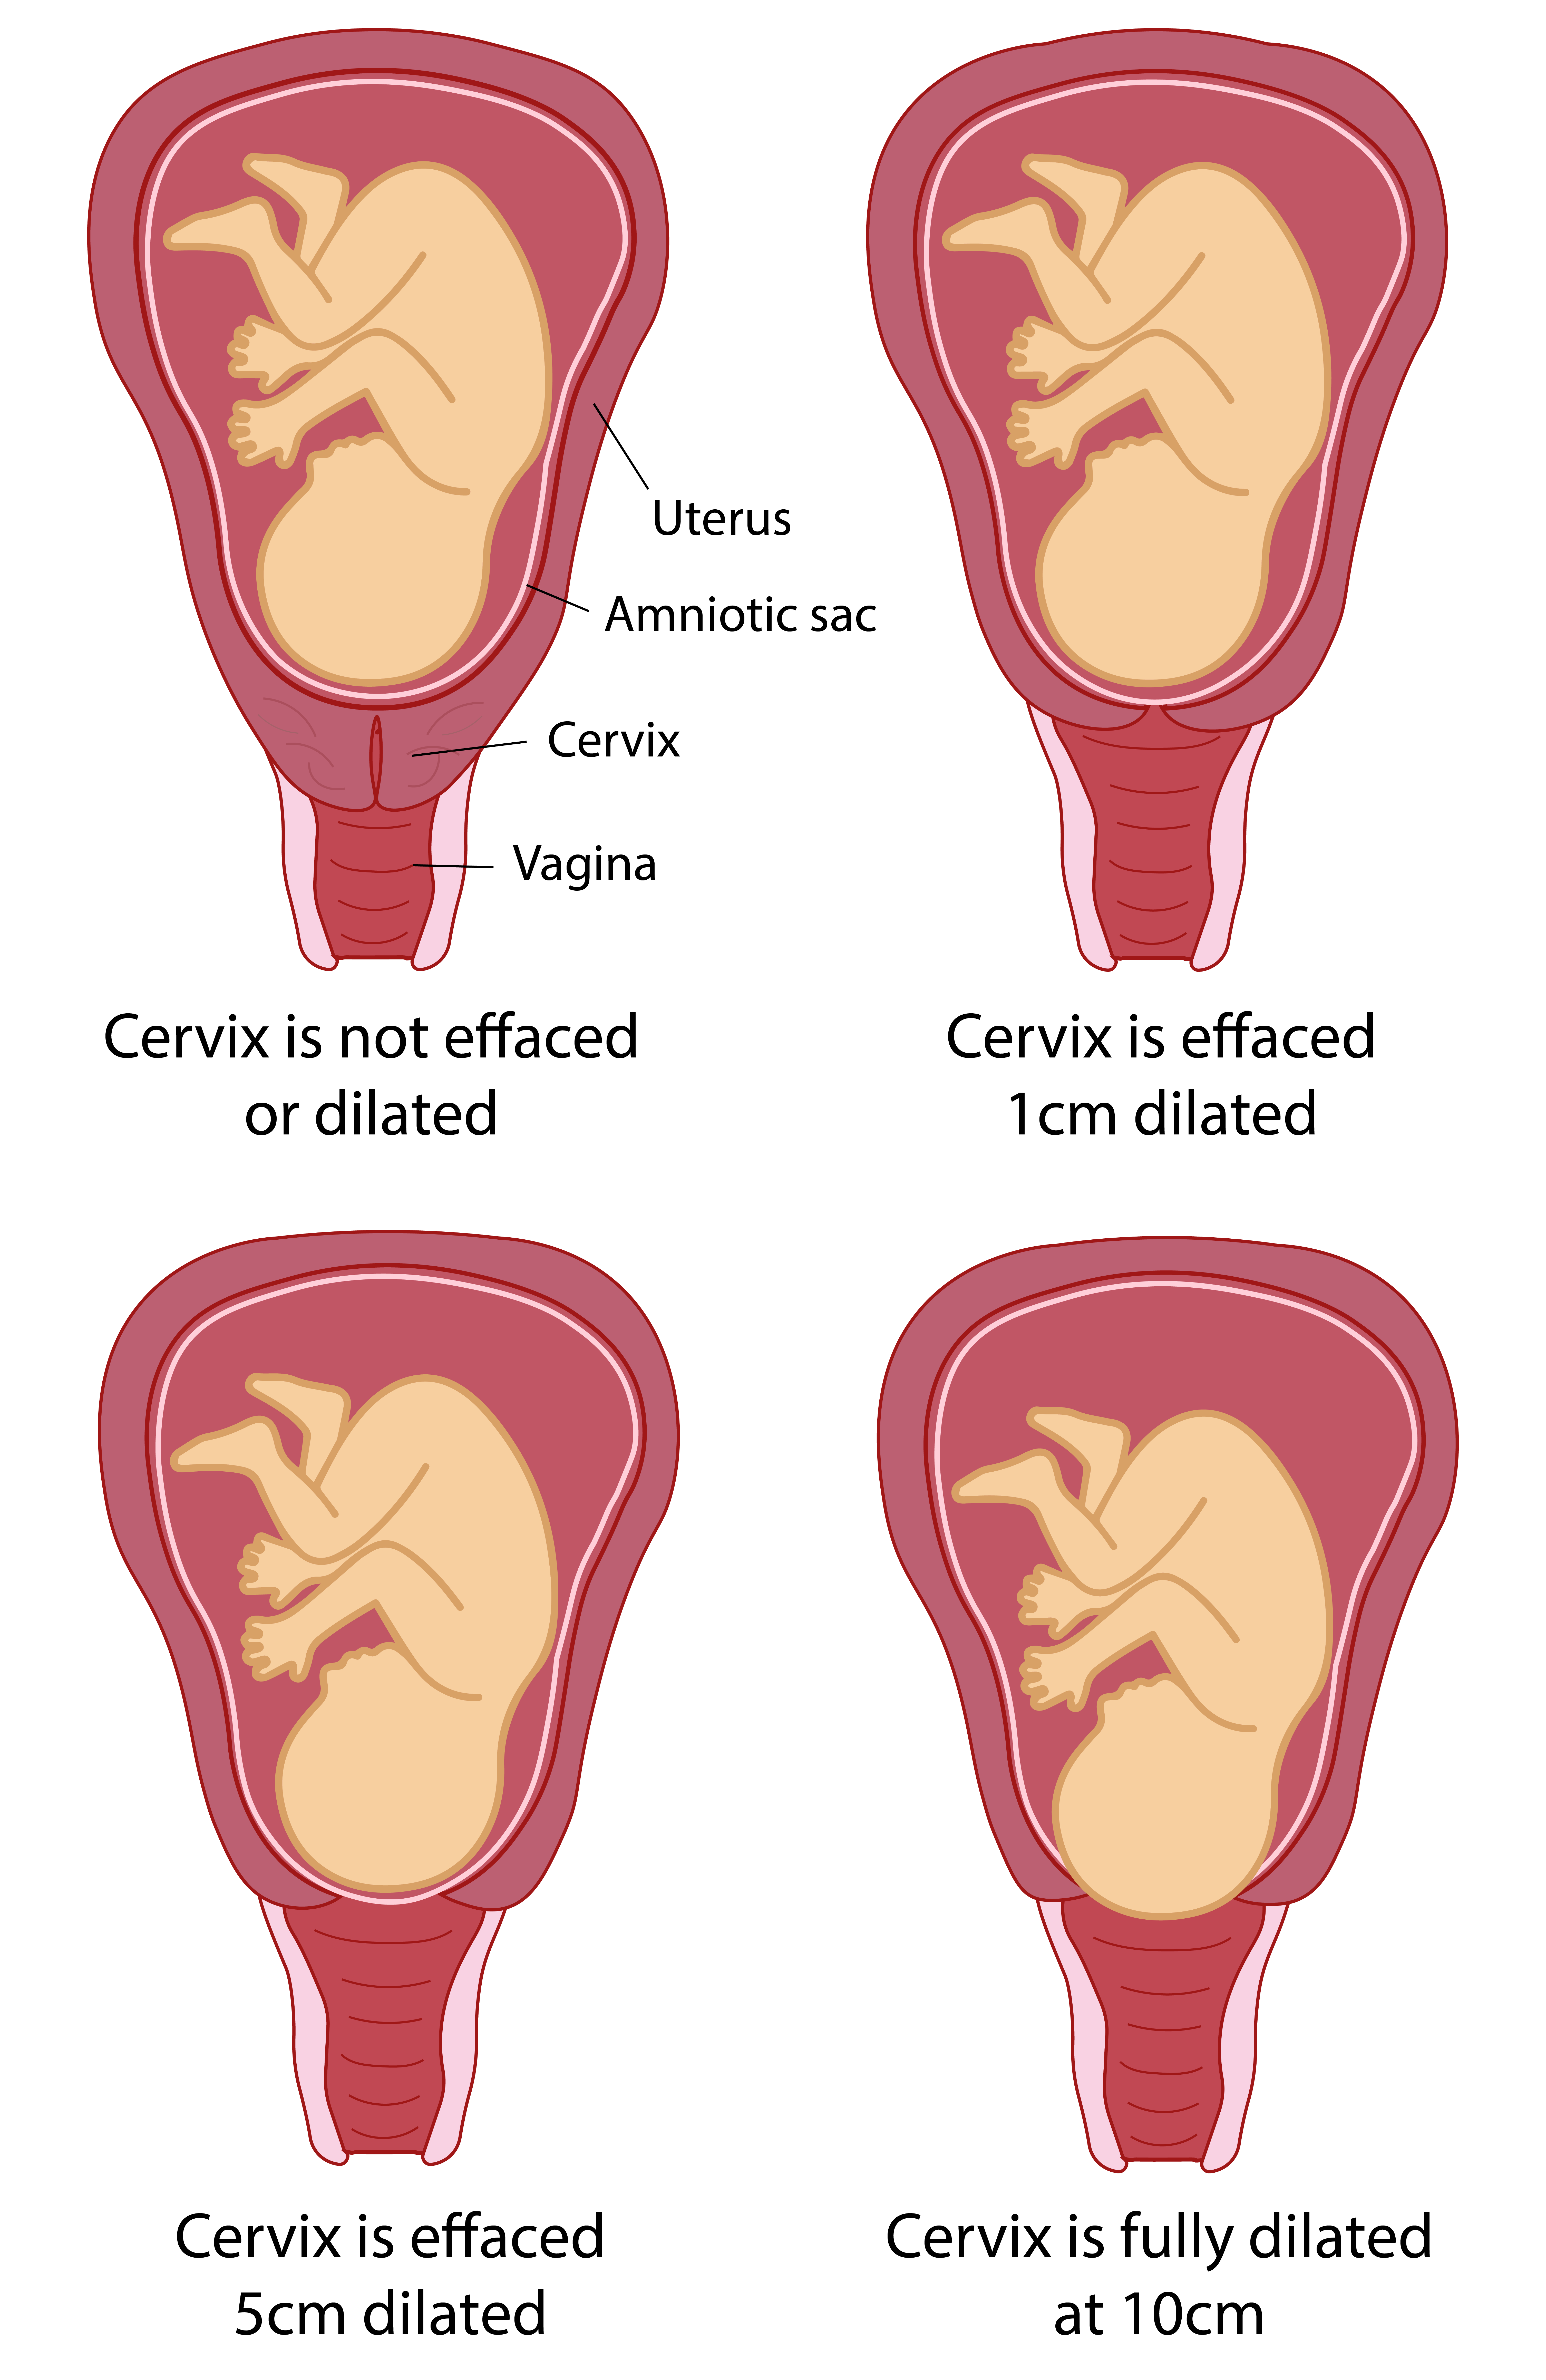 Illustration showing how the cervix dilates during labour.